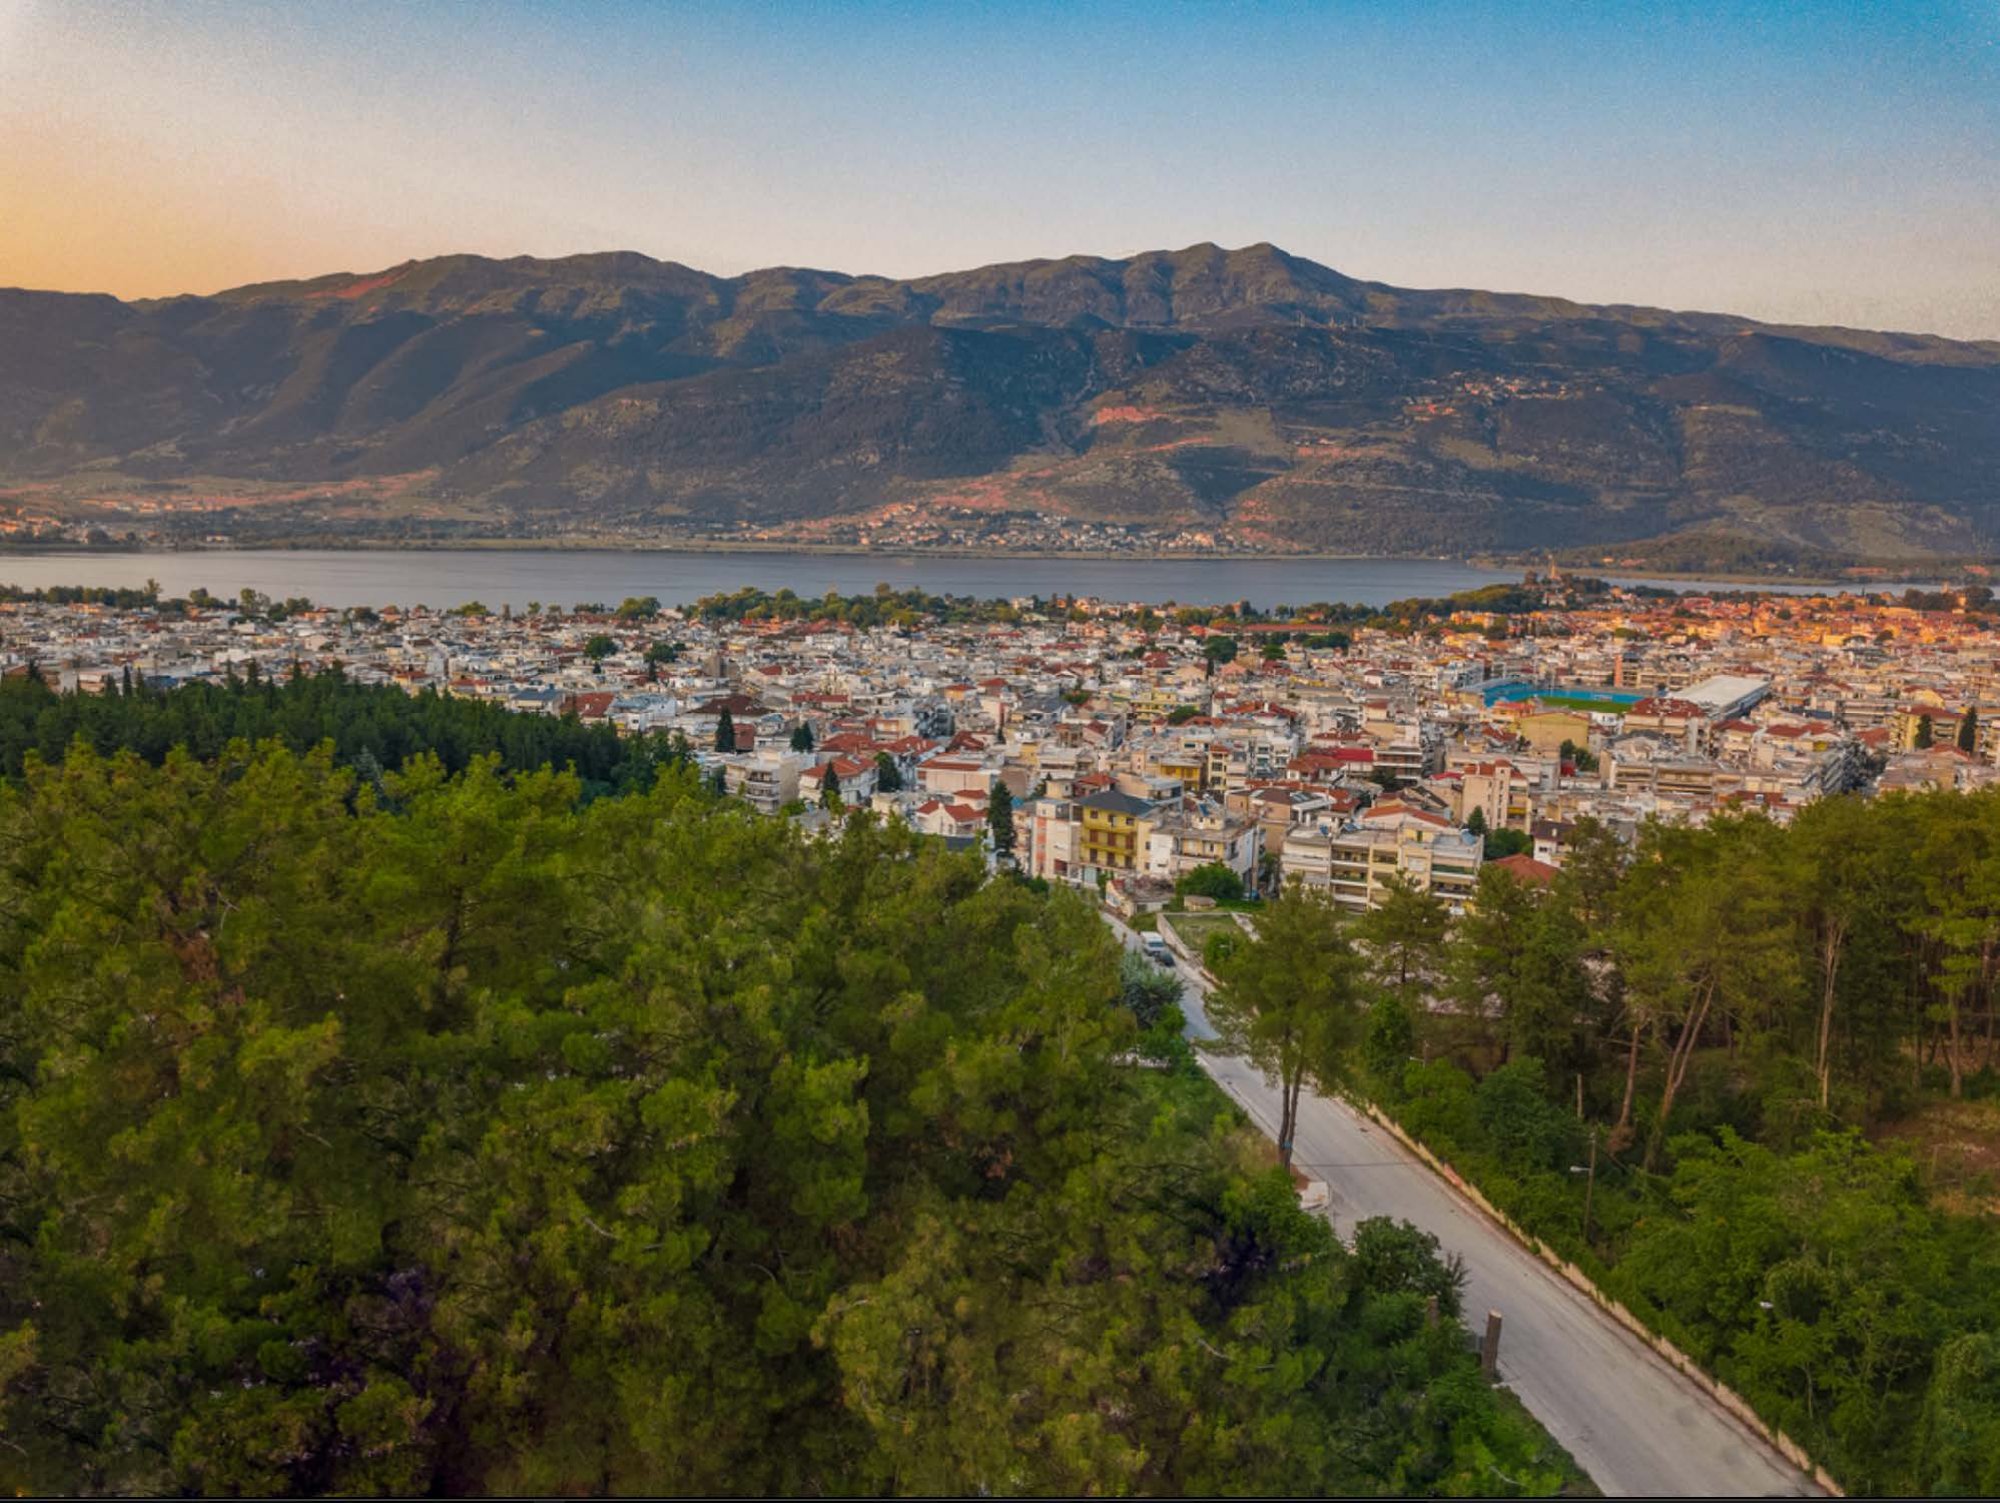 TAKE A TOUR TO THE CITY OF IOANNINA